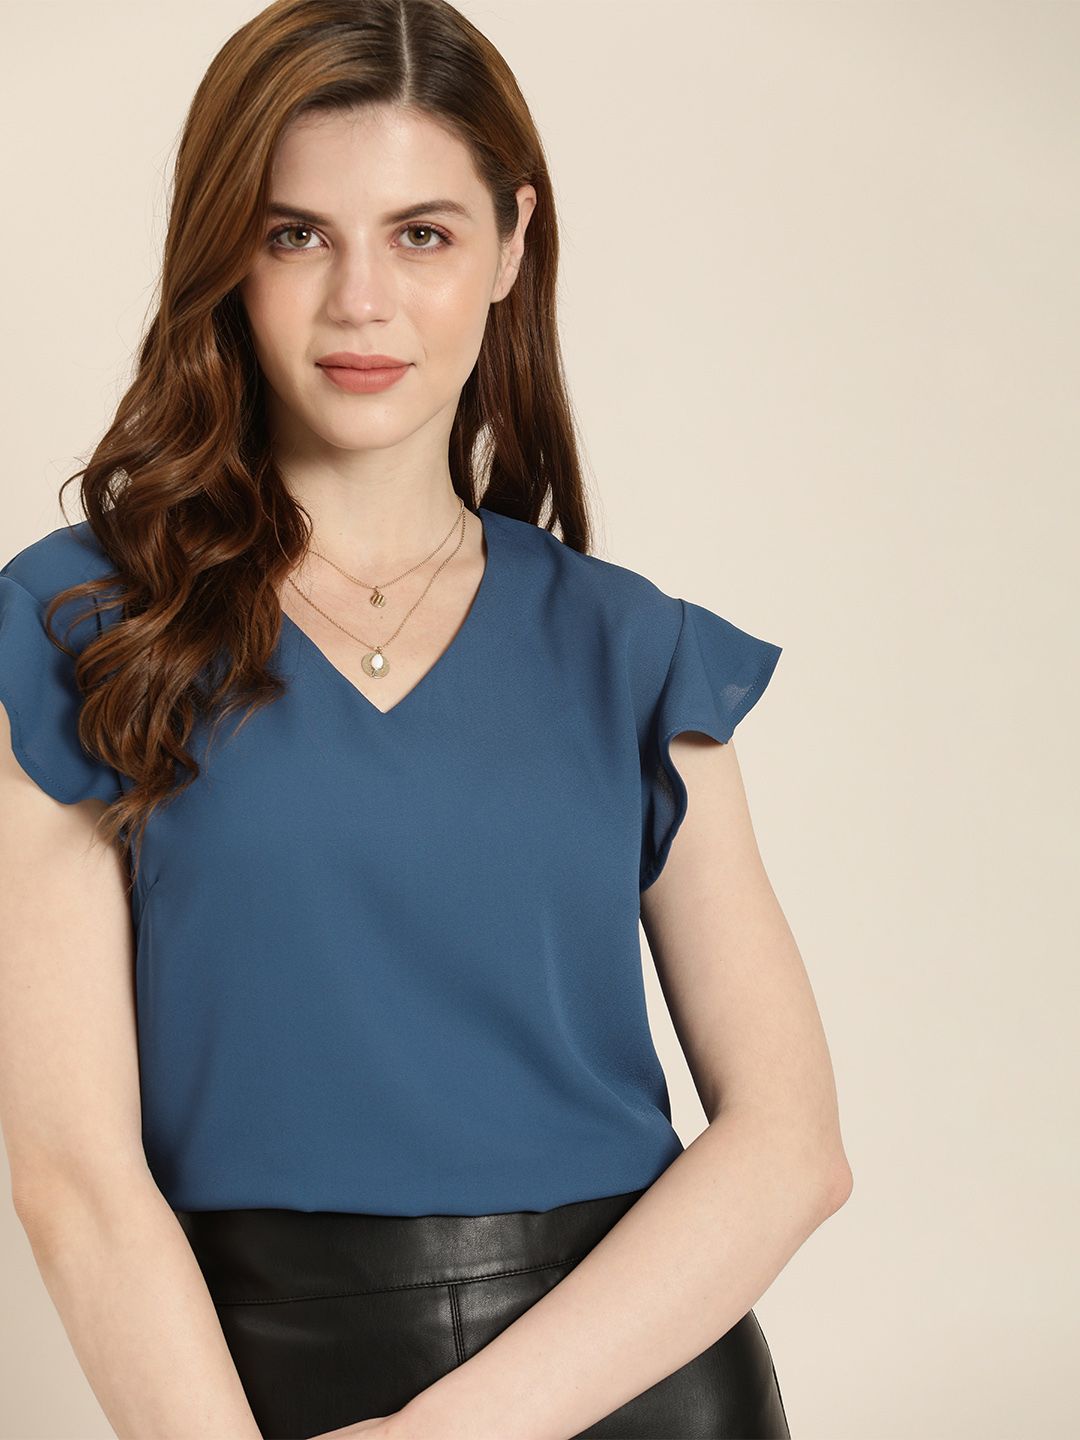 her by invictus Teal Blue V-Neck Top With Flutter Sleeves Price in India